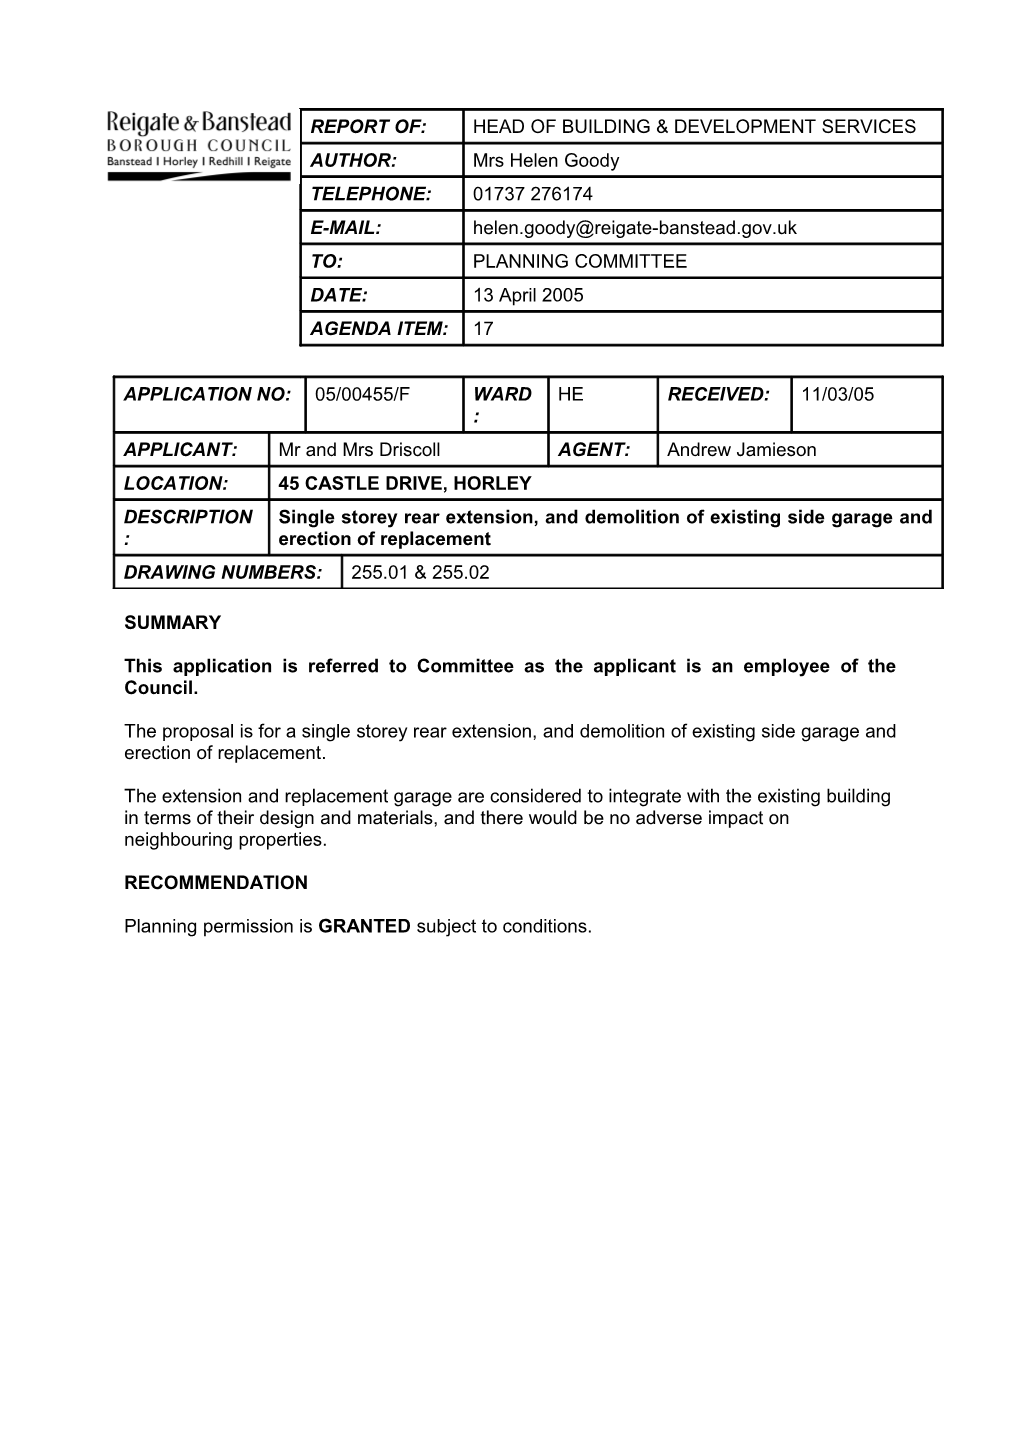 This Application Is Referred to Committee As the Applicant Is an Employee of the Council